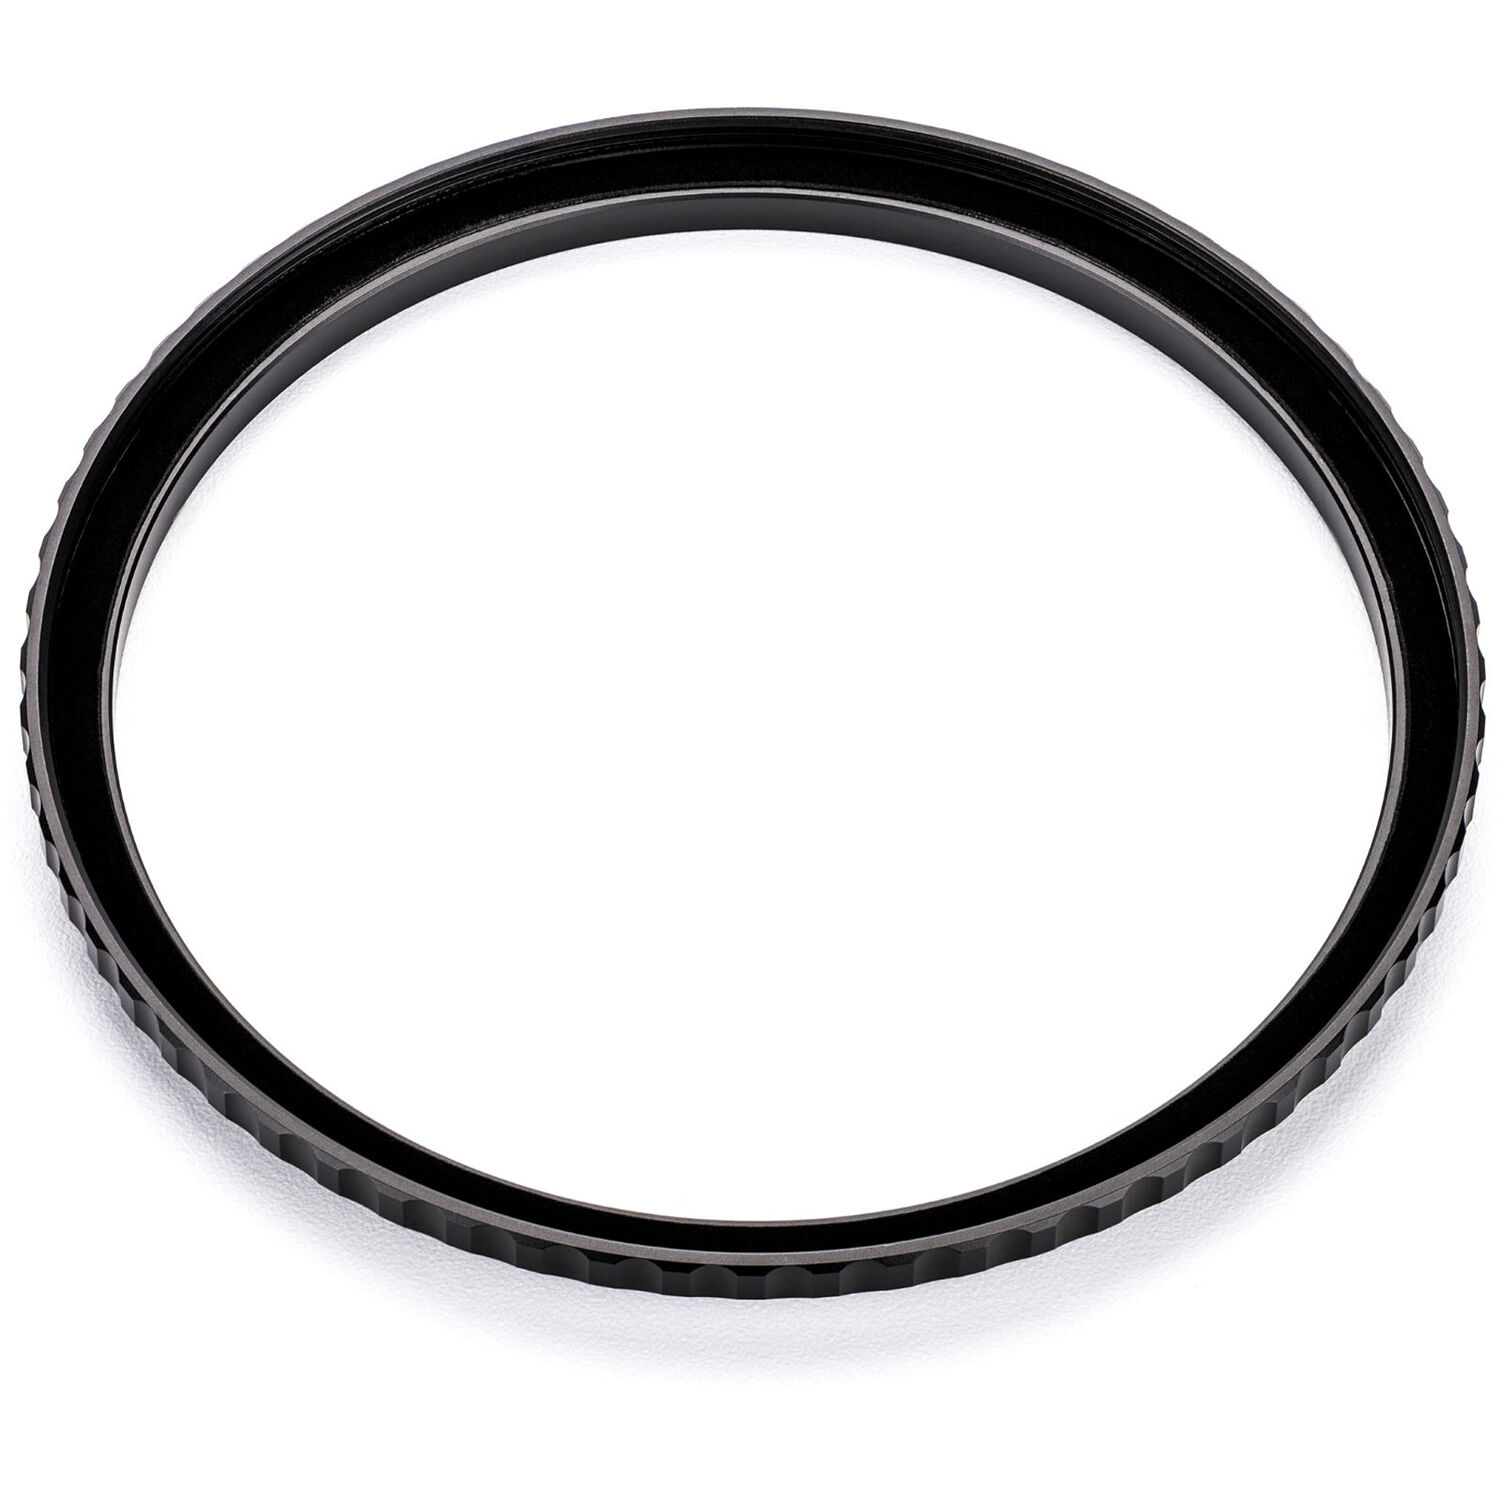 NiSi Brass Pro 49-52mm Step-Up Ring